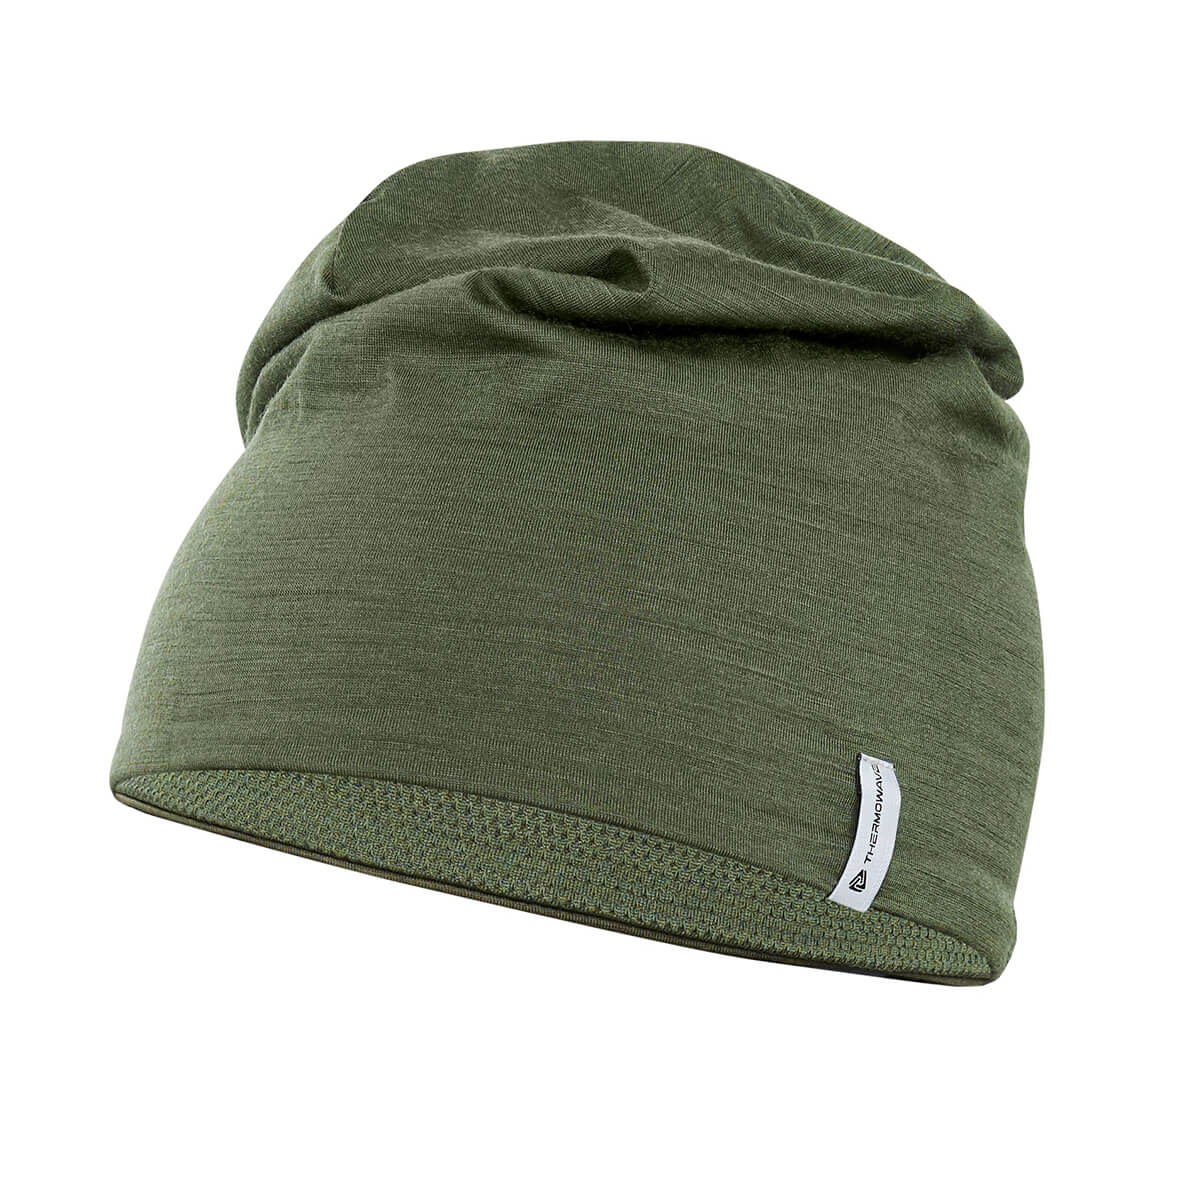 Thermowave hat baselayer (green)